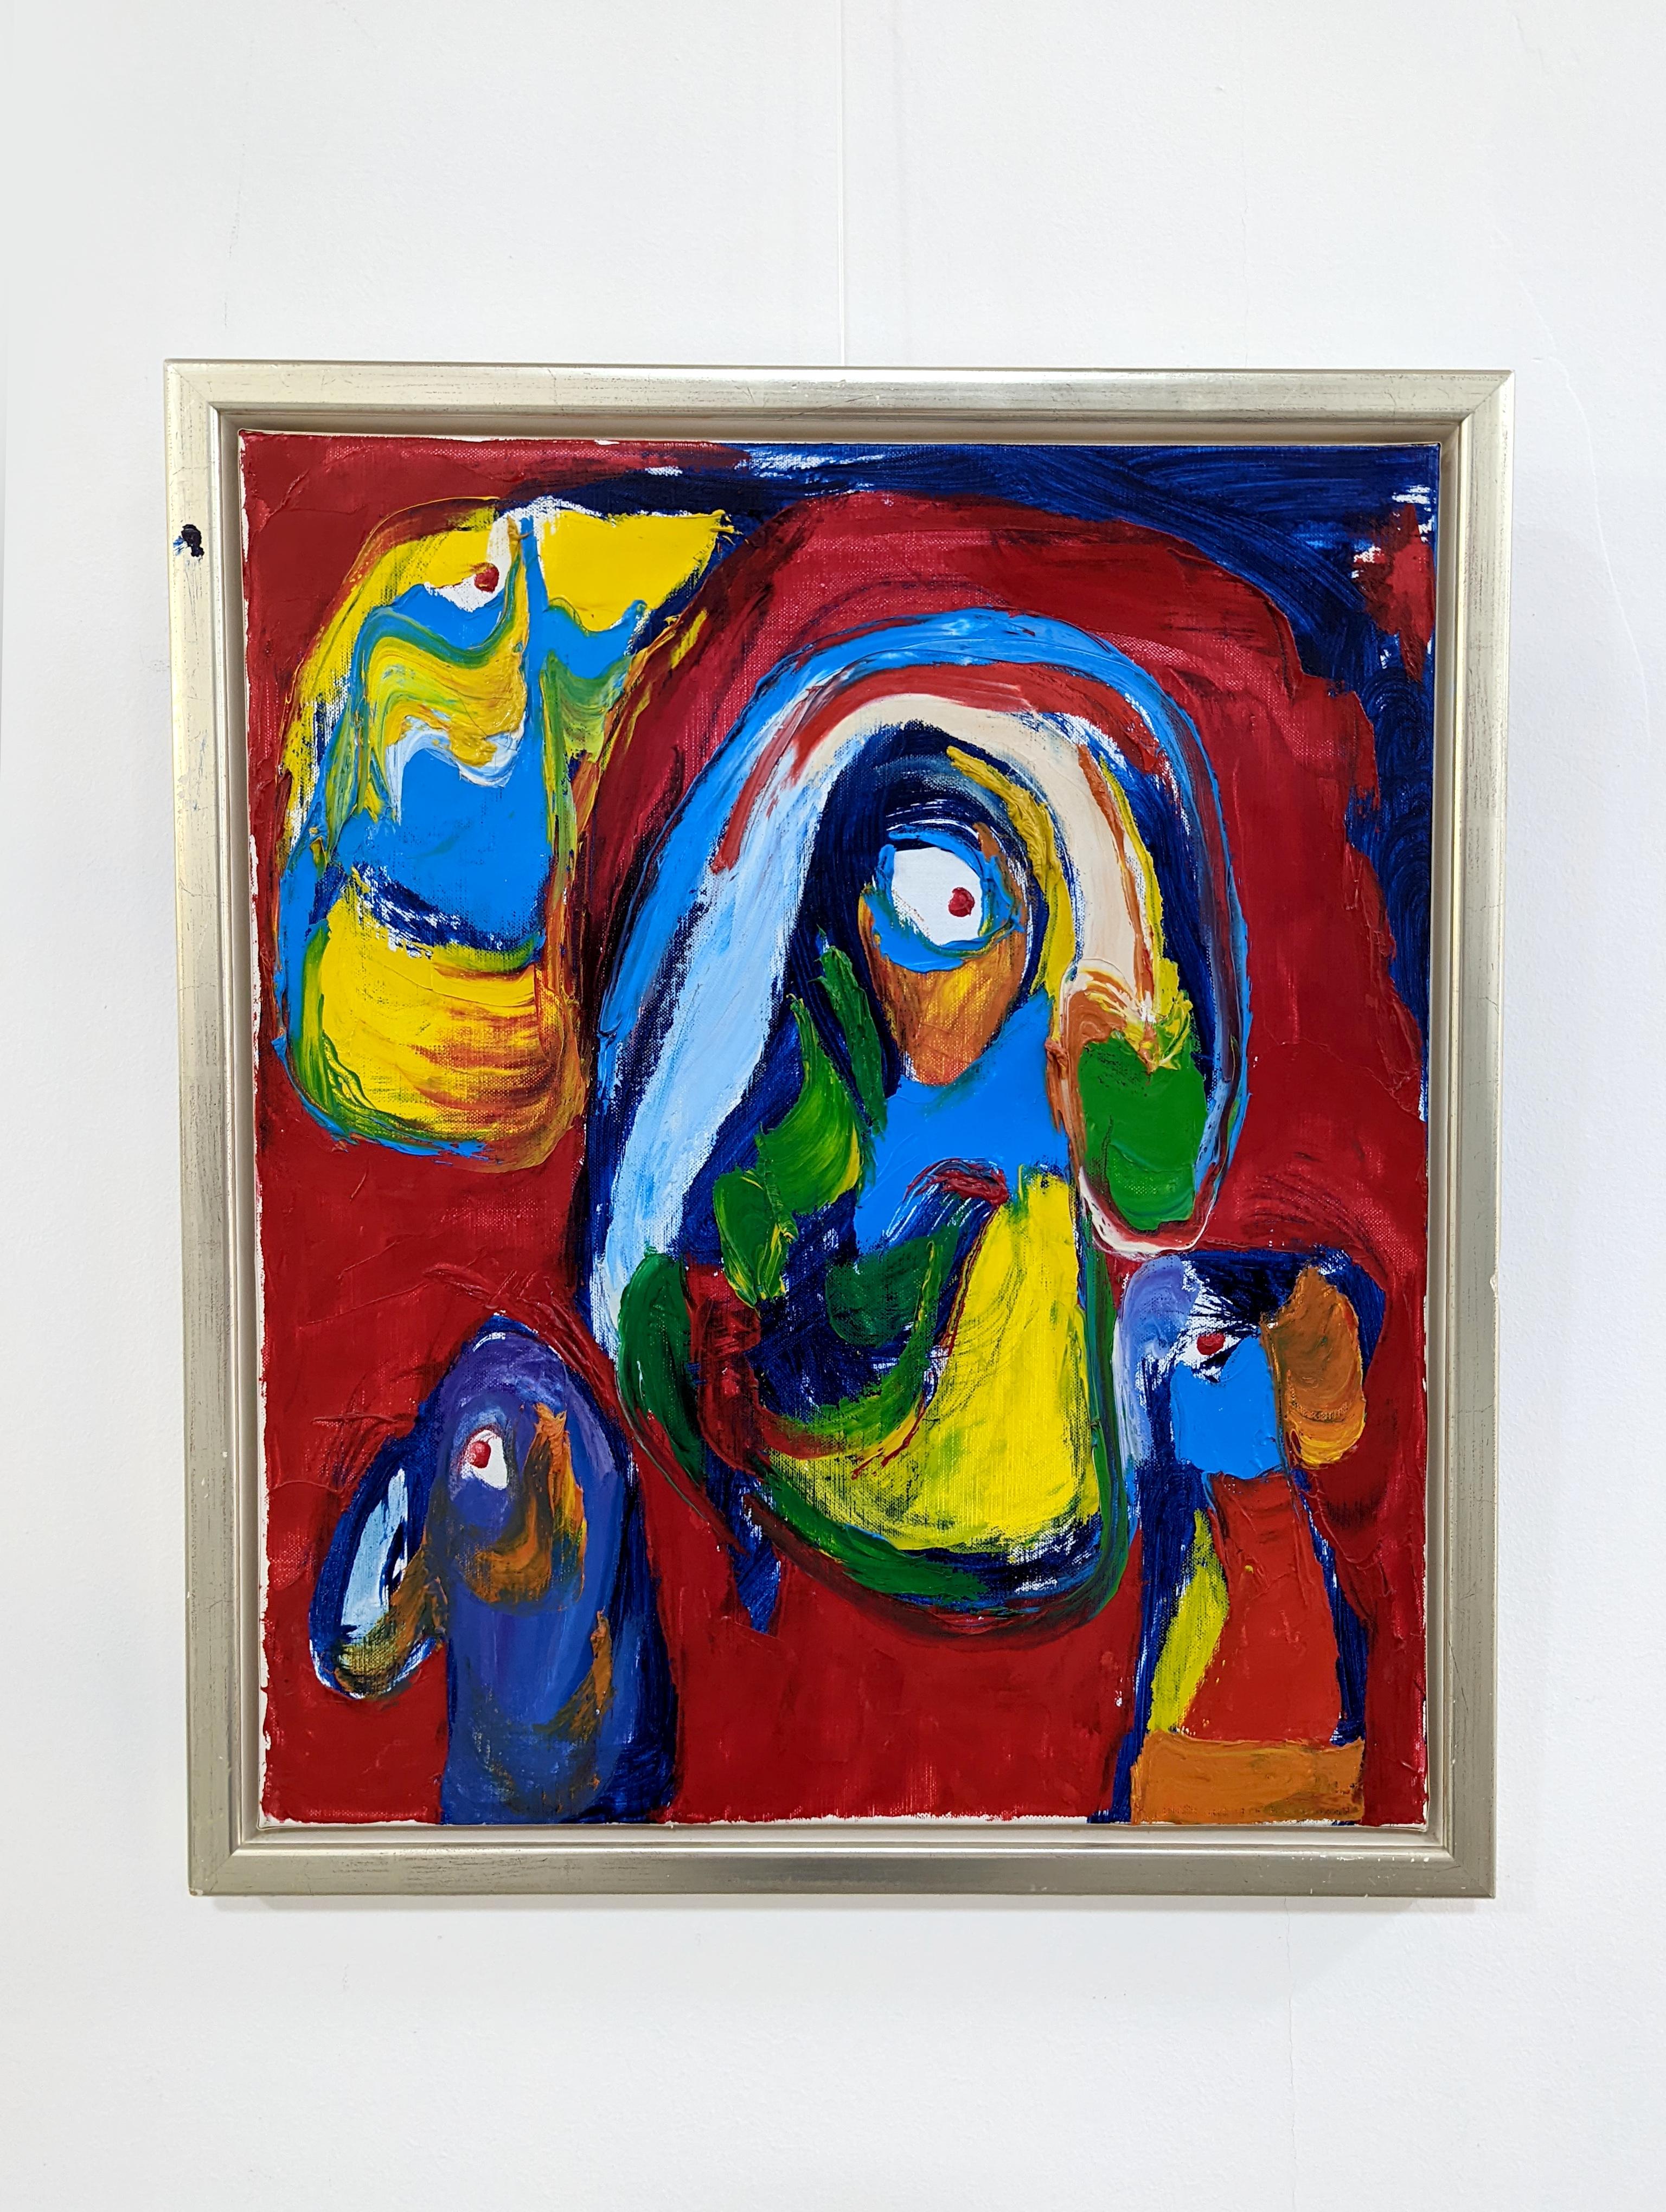 Wonderful work of the Danish artist Finn Pedersen (1944-2014) , born in 1944 in Bornholm. In 1966, he exhibited with artists from the CoBrA group such as Asger Jorn and Karel Appel. His work is clearly influenced by the informal painting style of